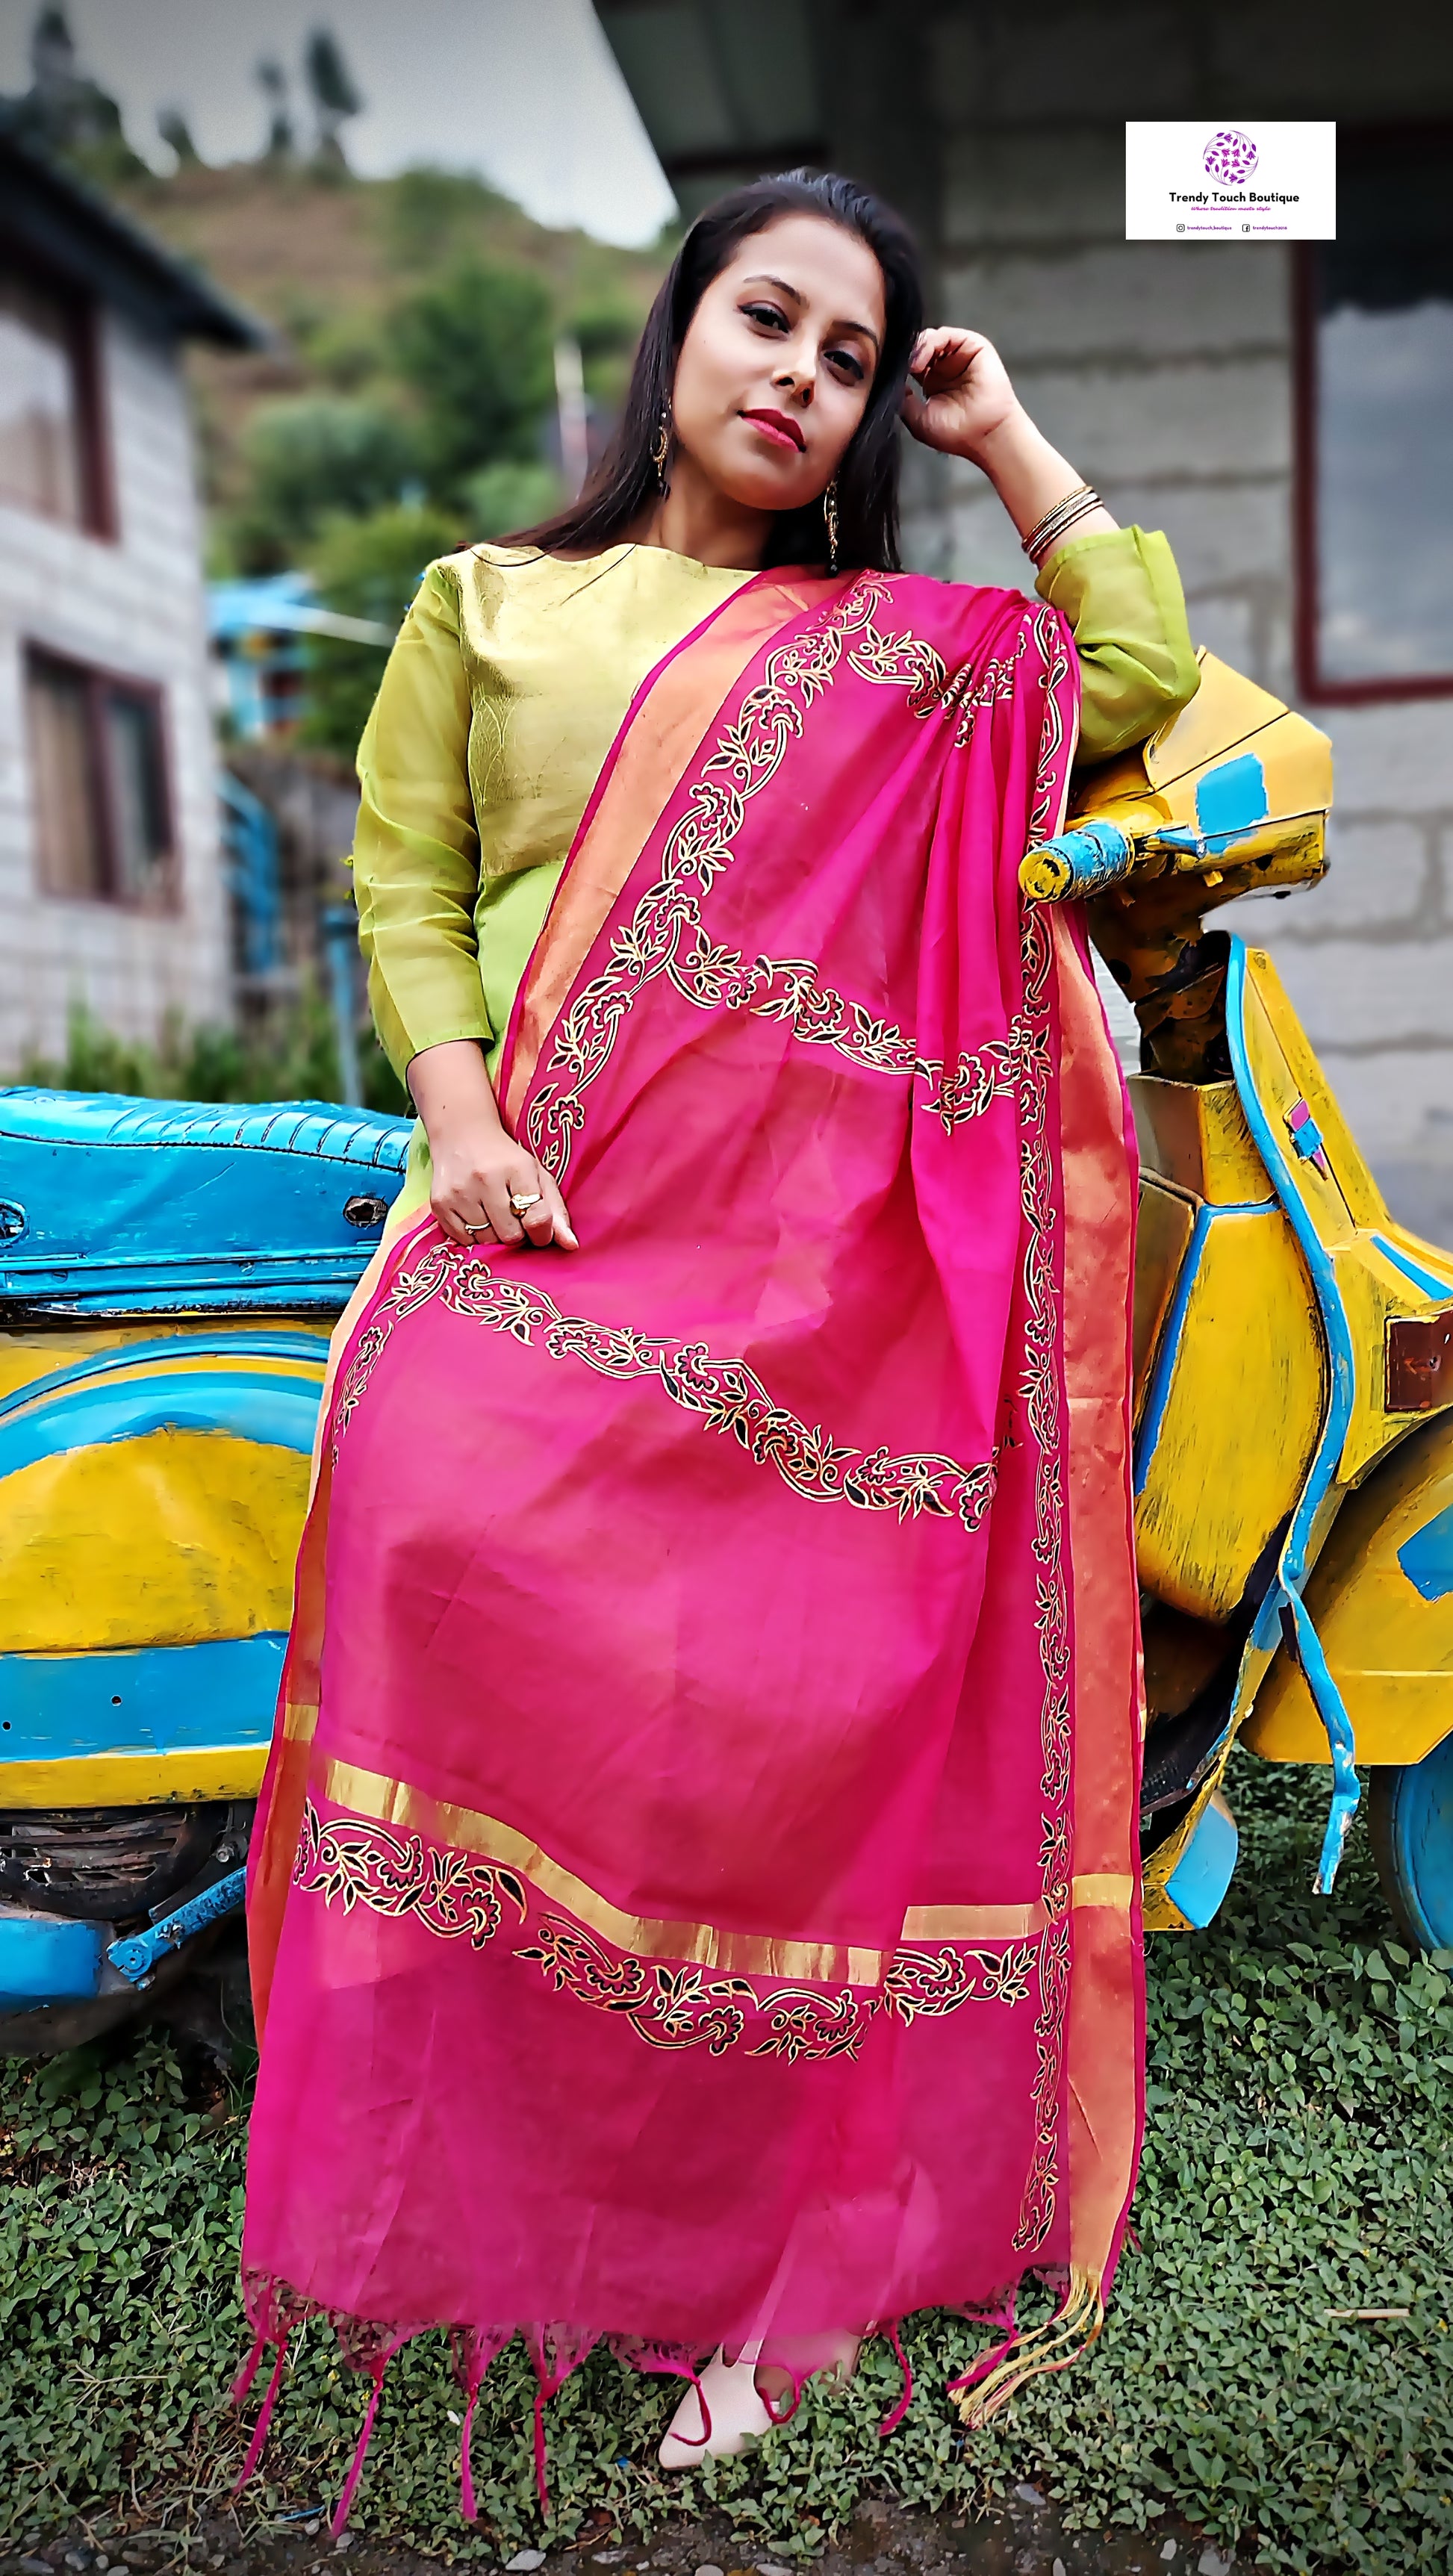 Handpainted pink floral design chanderi silk dupatta for special celebration and gifting